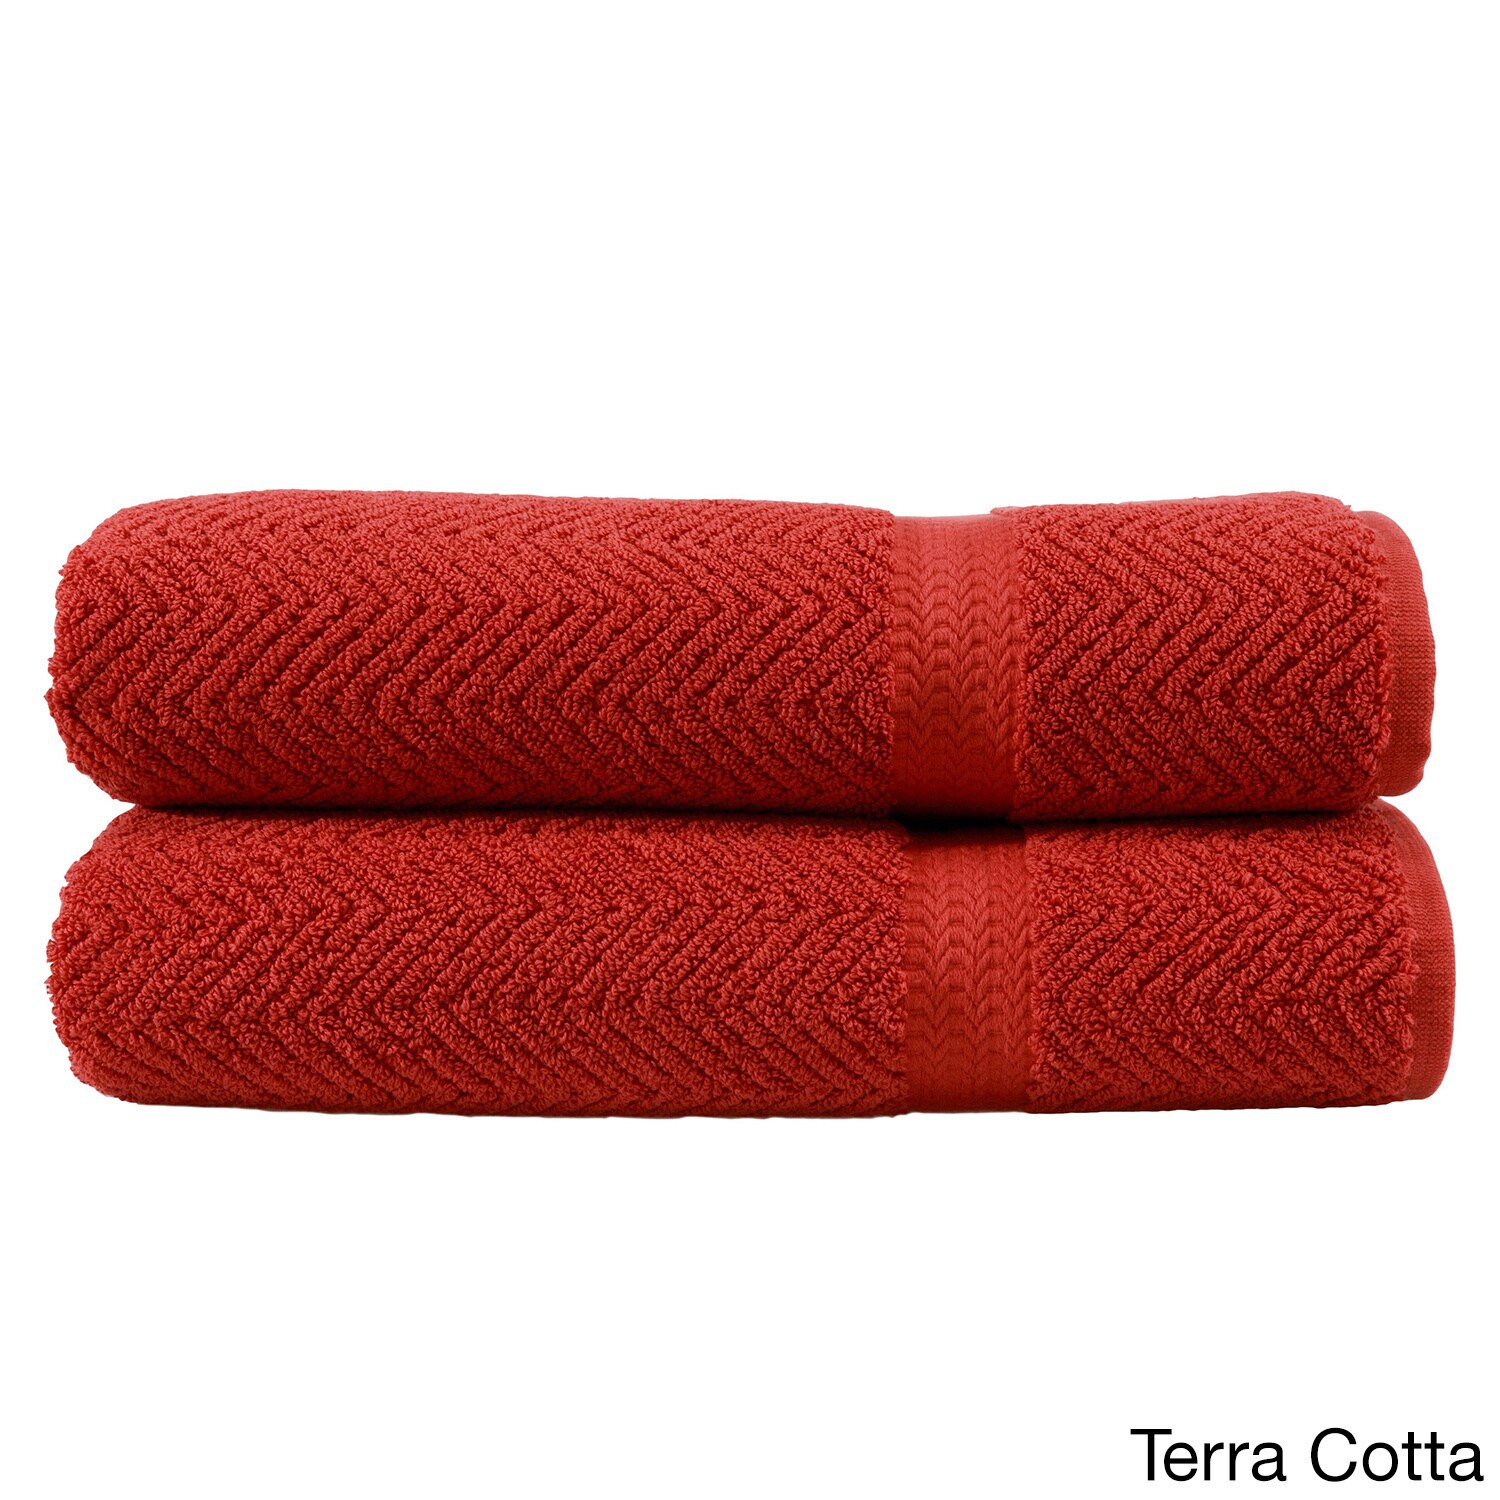 https://ak1.ostkcdn.com/images/products/7594994/Authentic-Hotel-and-Spa-Herringbone-Weave-Turkish-Cotton-Bath-Towel-Set-of-2-8f5f64b3-e2a7-4d21-ab51-8b9dd758a715.jpg